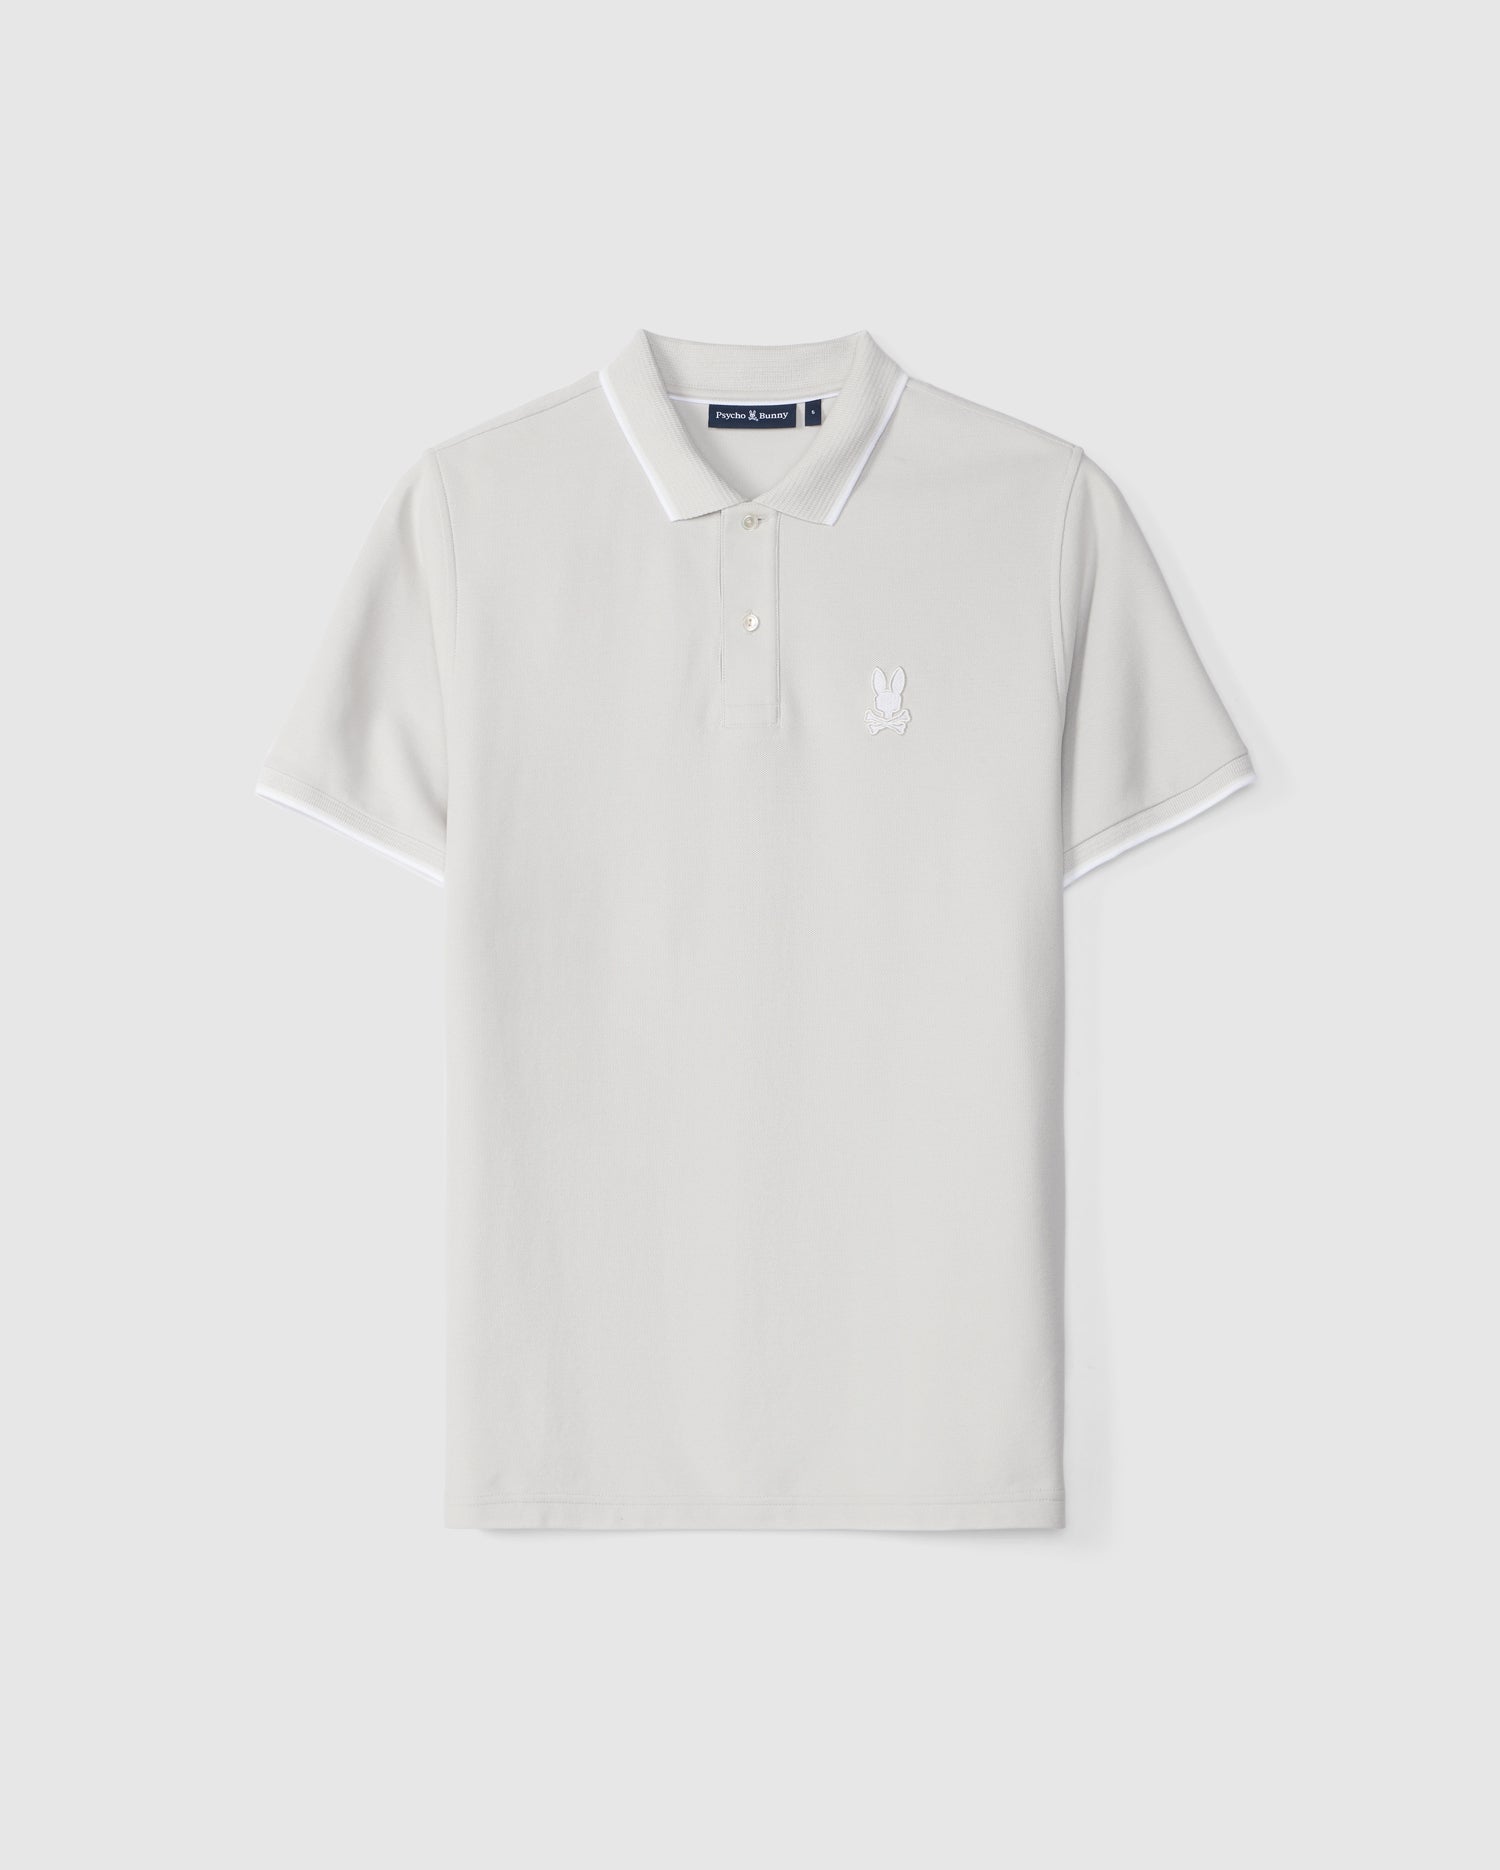 White Psycho Bunny polo shirt displayed against a plain background, featuring a small embroidered logo on the left chest, short sleeves, and a button-up collar with mother-of-pearl buttons.